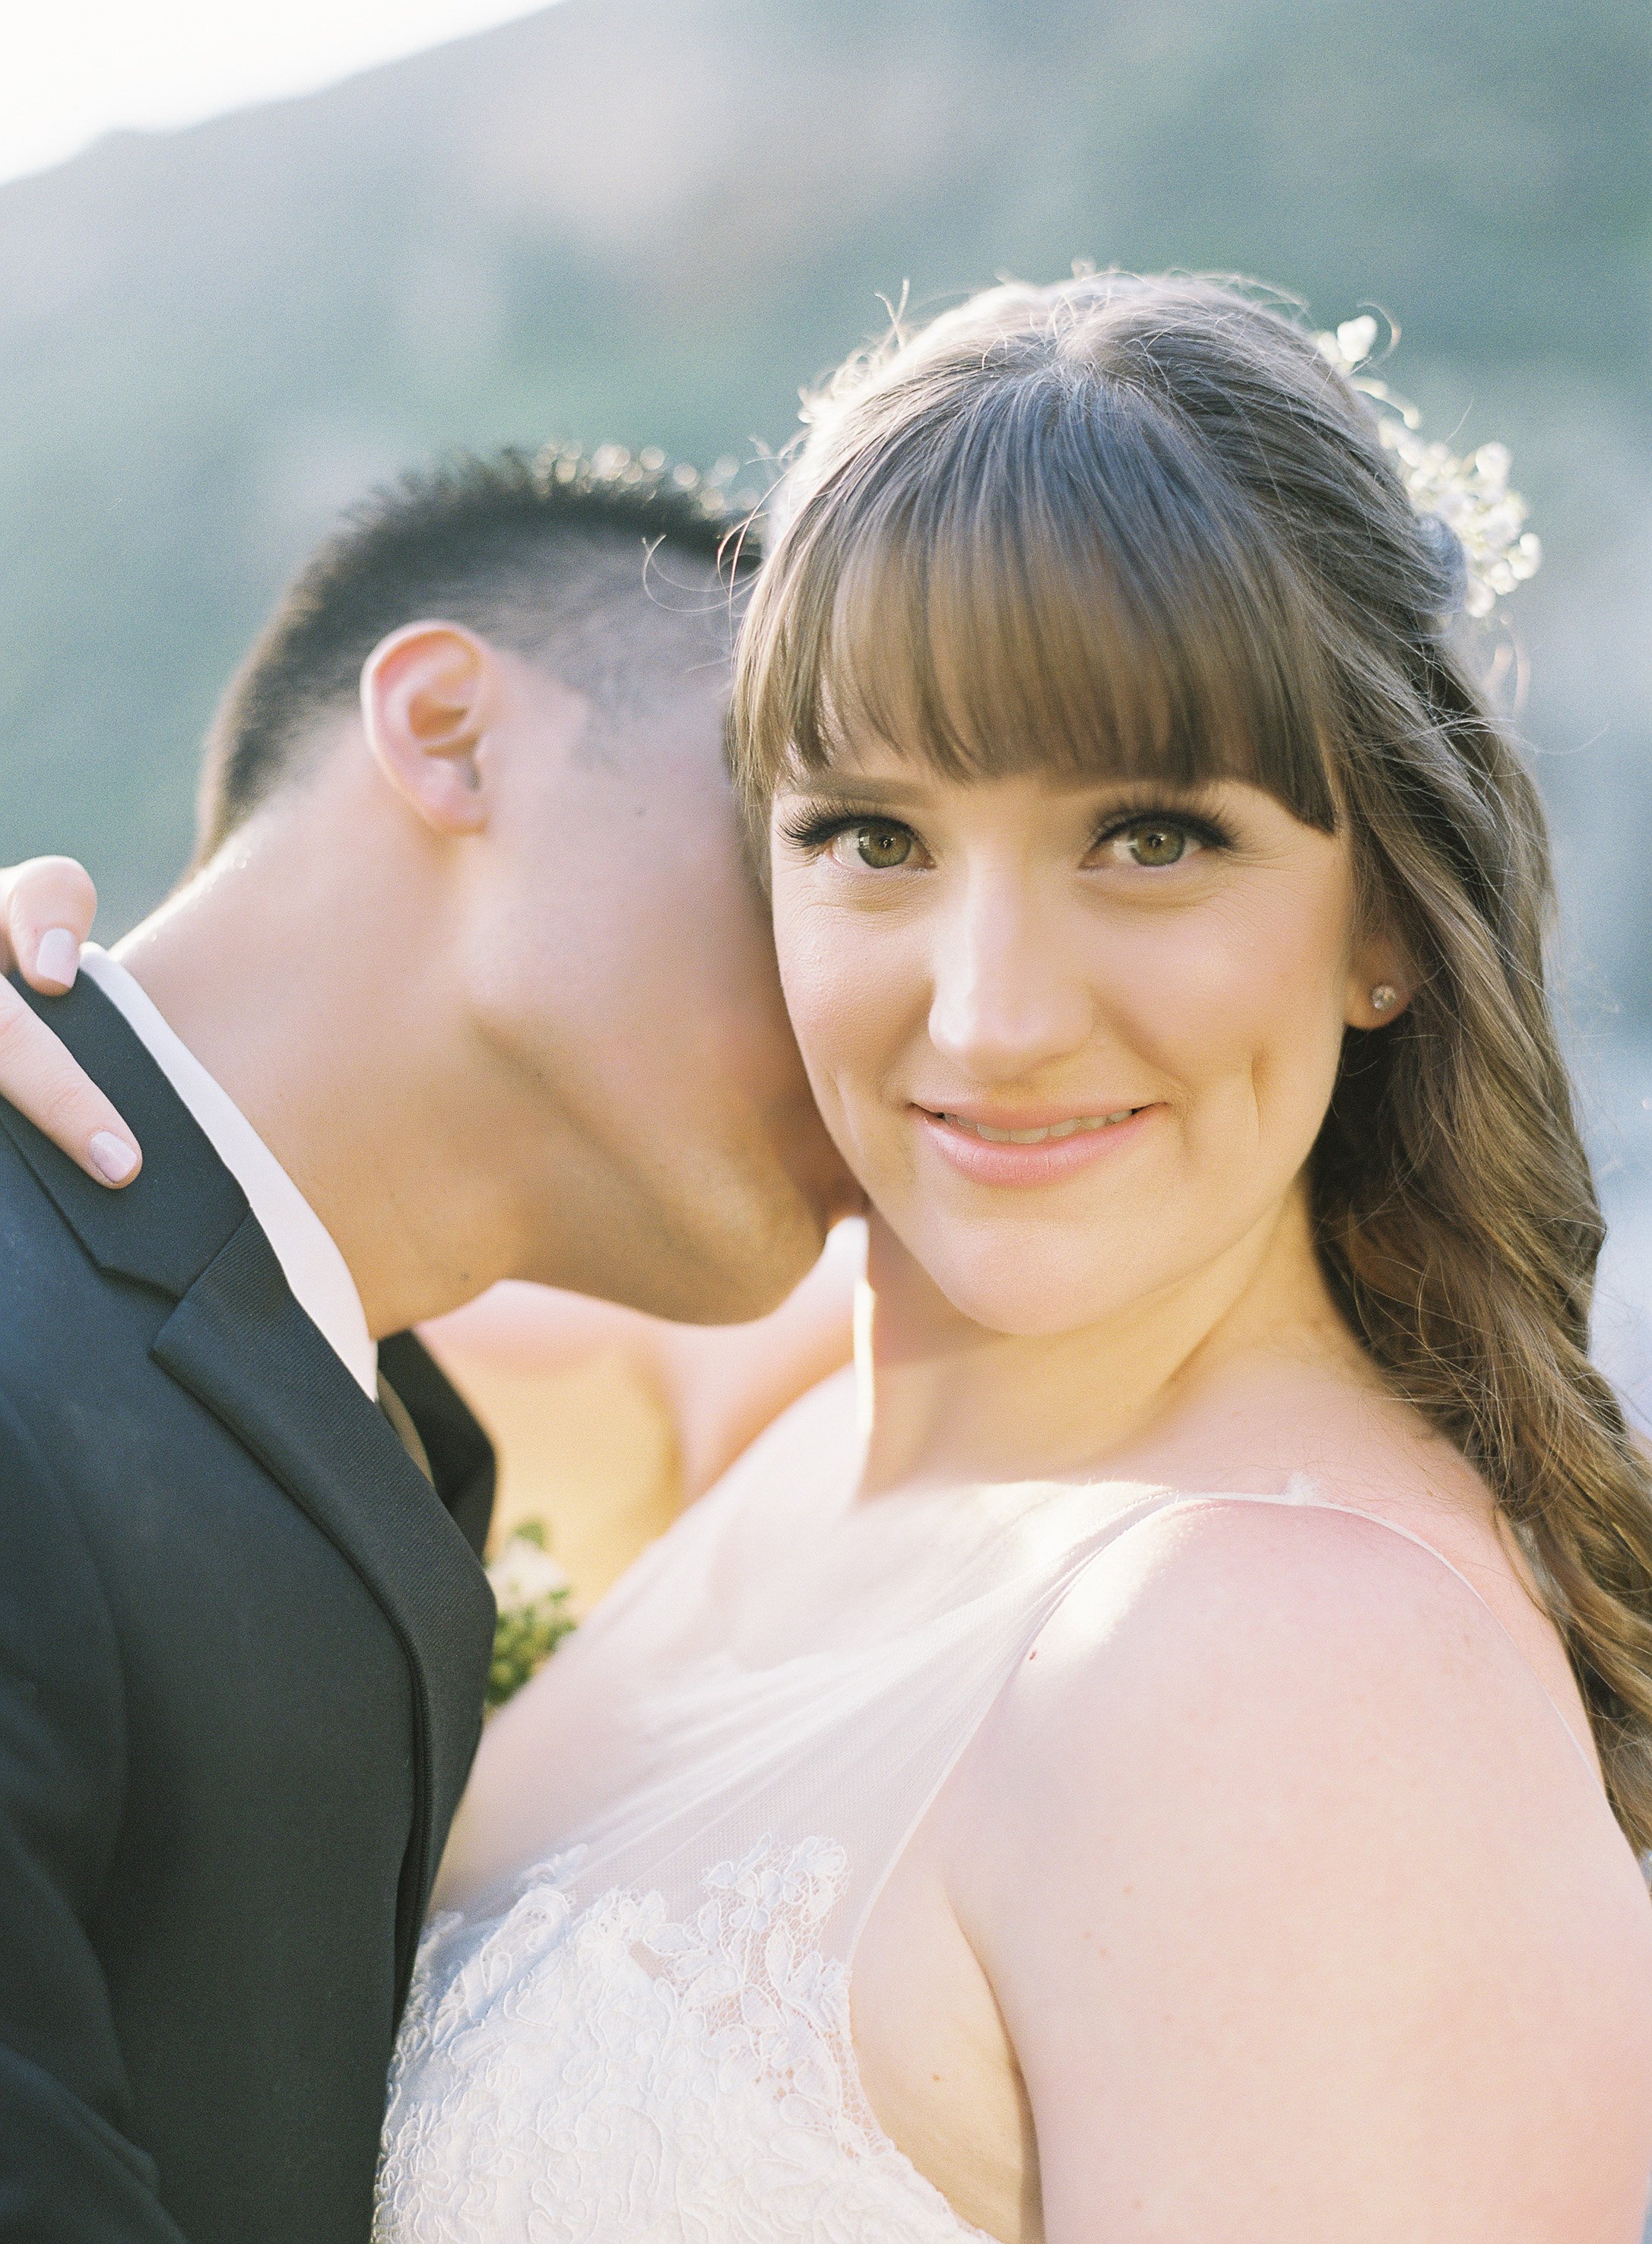 Brunette Bride with Bangs and Hair Down with Husband Kissing Neck. Wedding Hair and Makeup by Vanity Belle in Orange County (Costa Mesa) and San Diego (La Jolla)